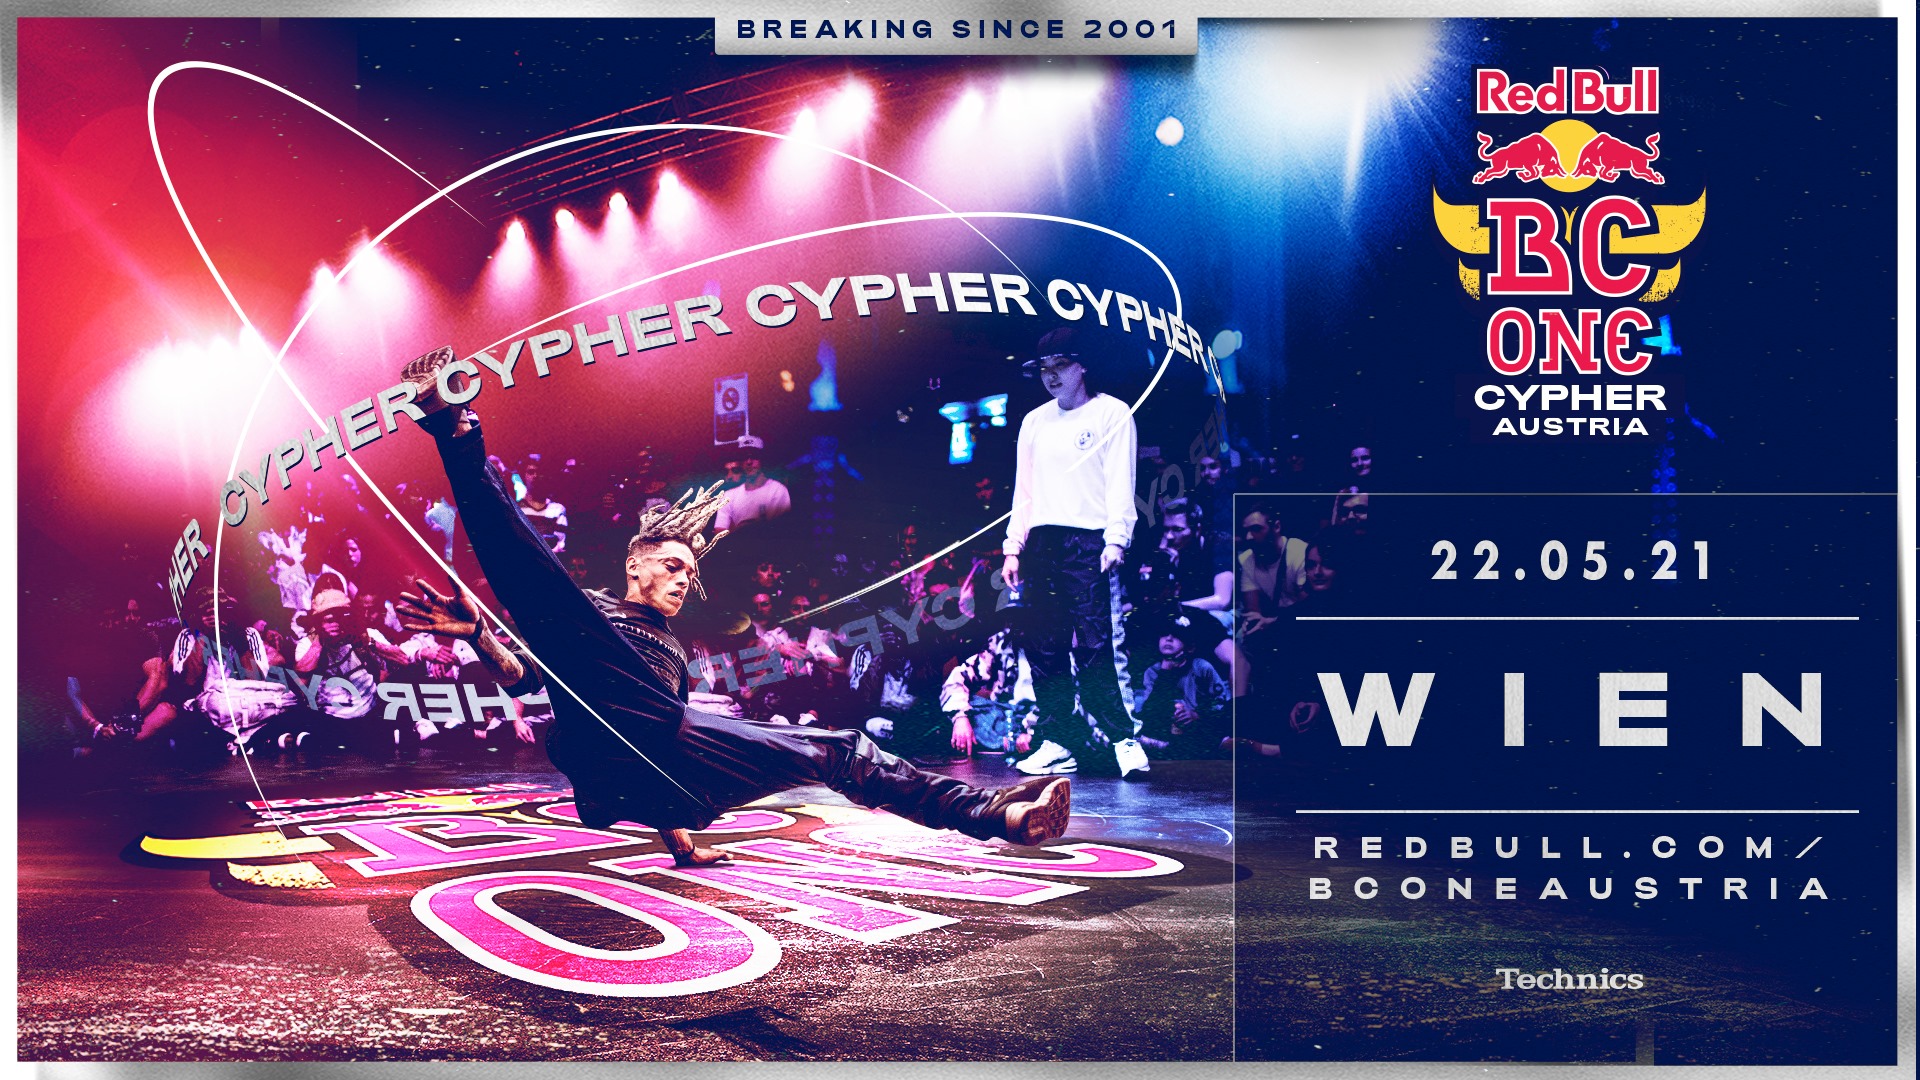 Red Bull BC One Cypher Austria 2021